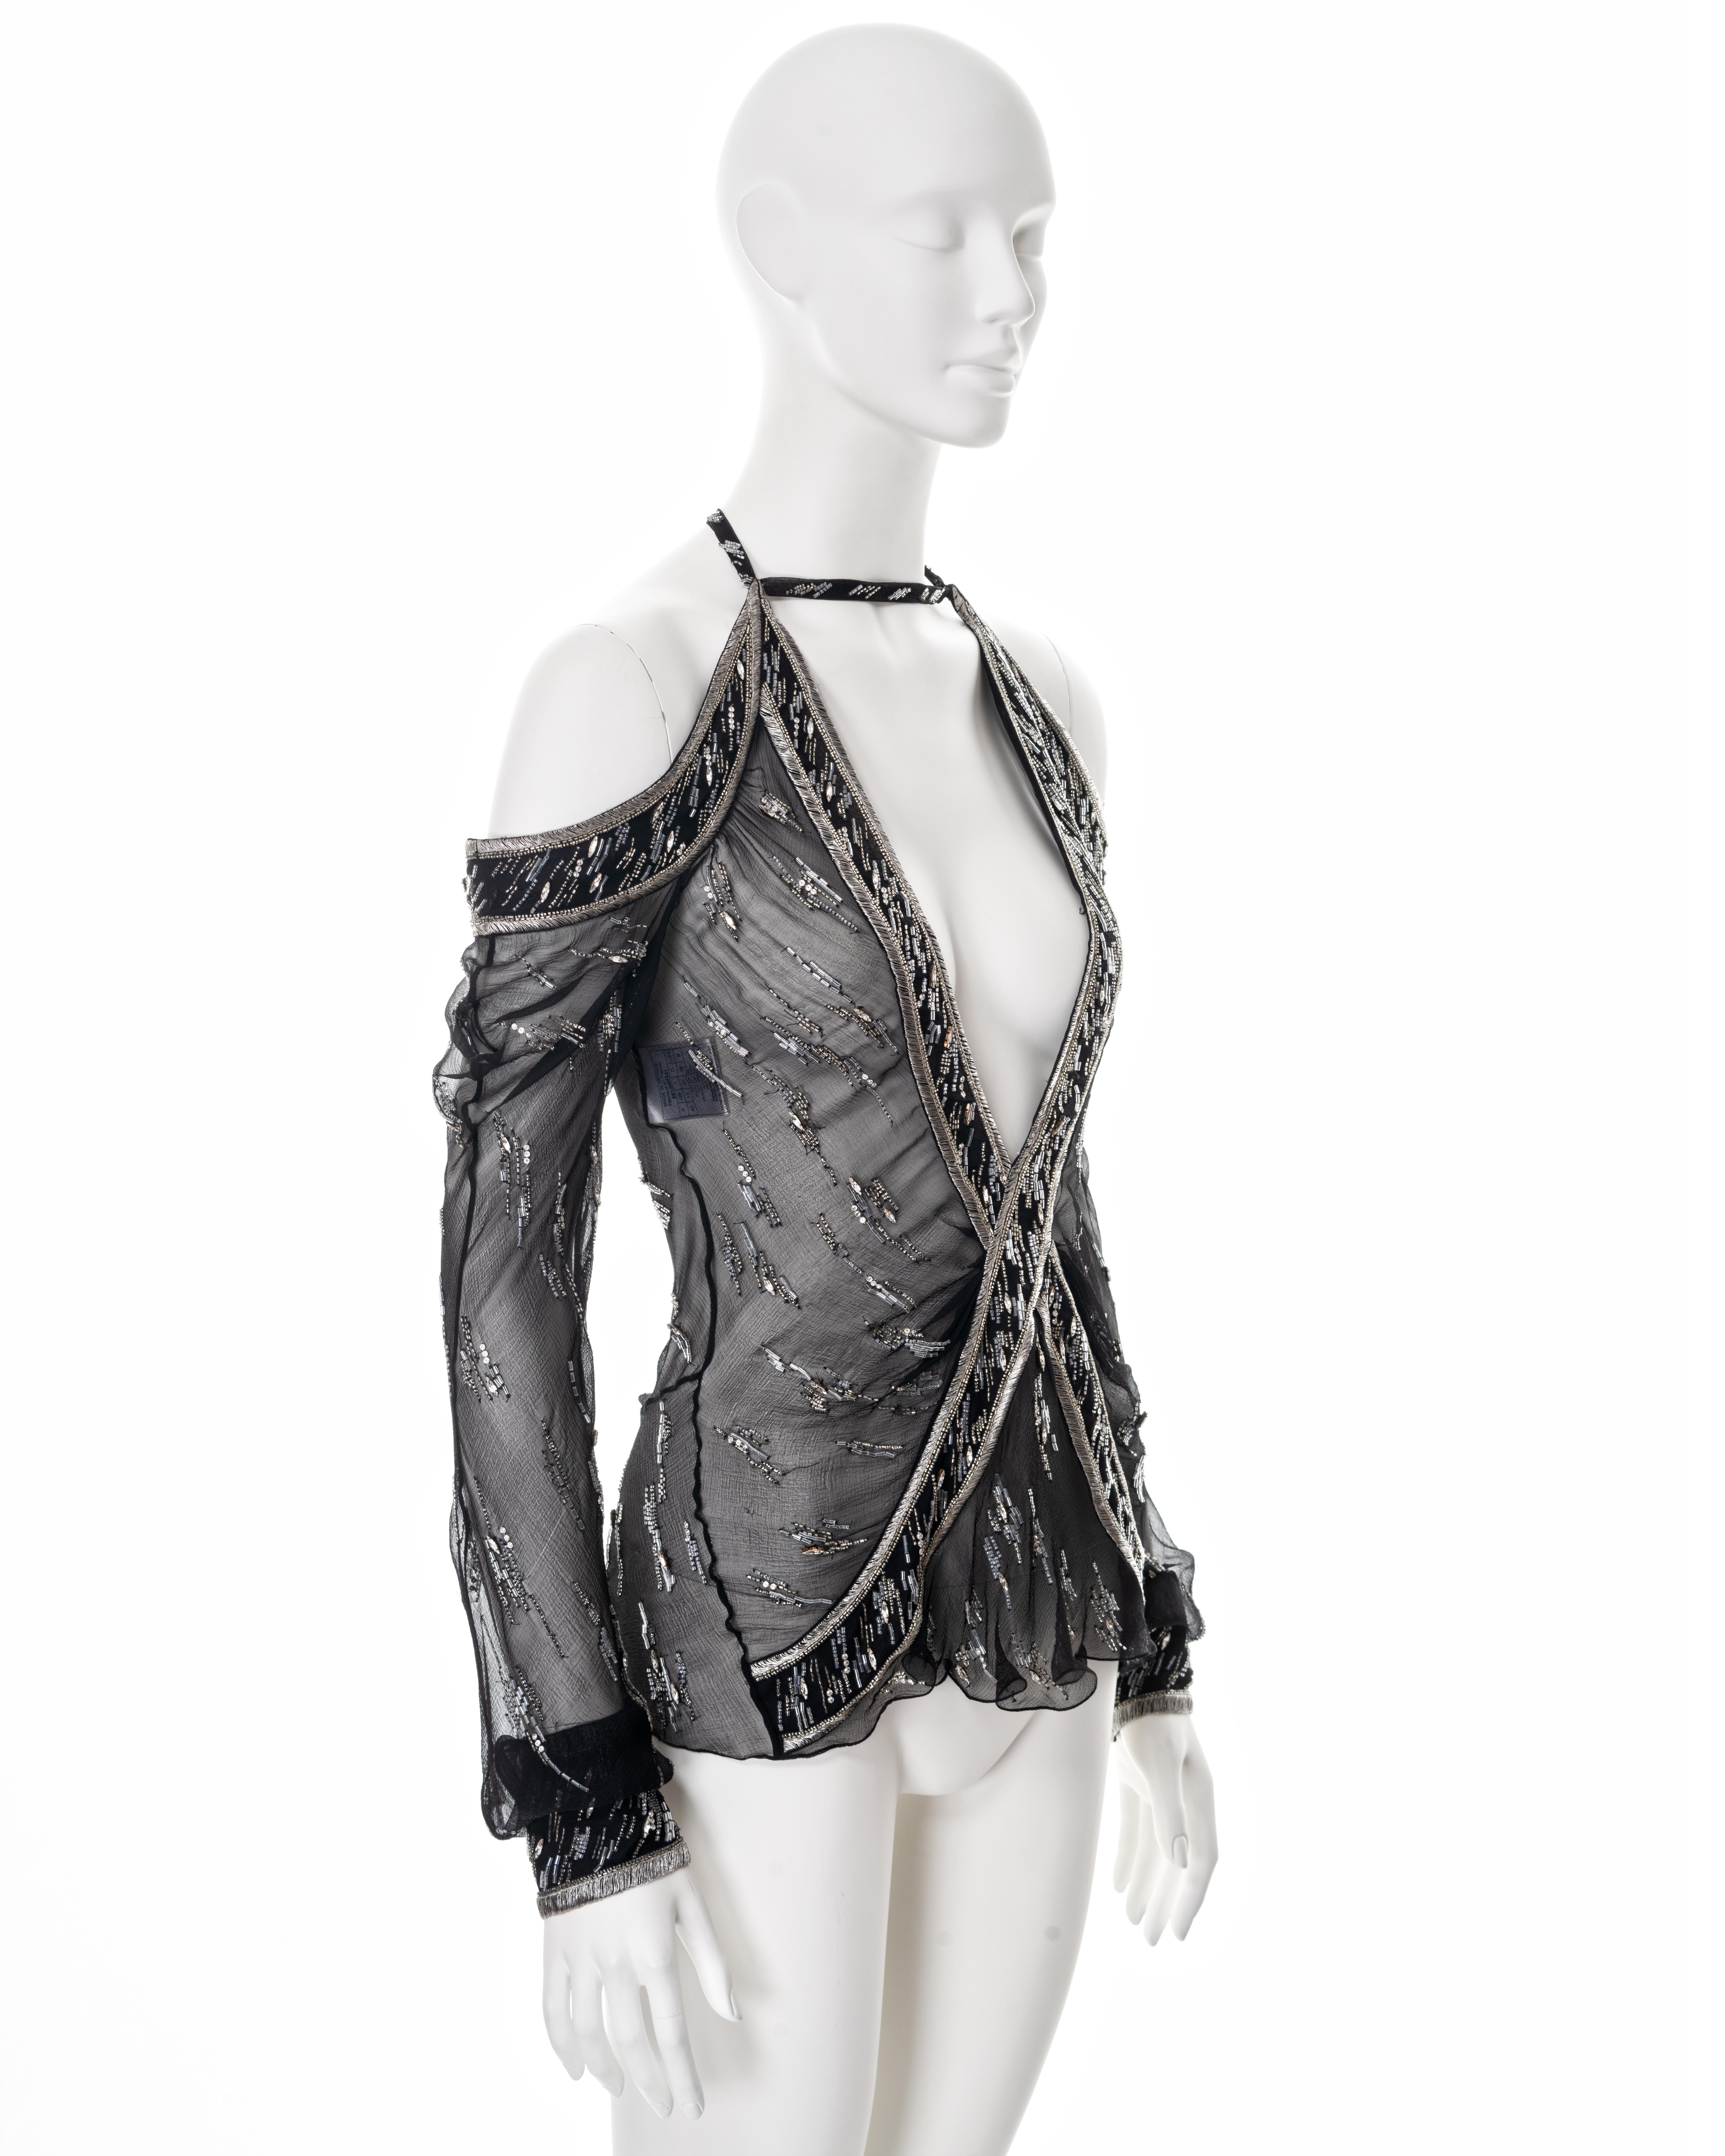 Christian Dior by John Galliano embellished silk evening blouse, ss 2005 8